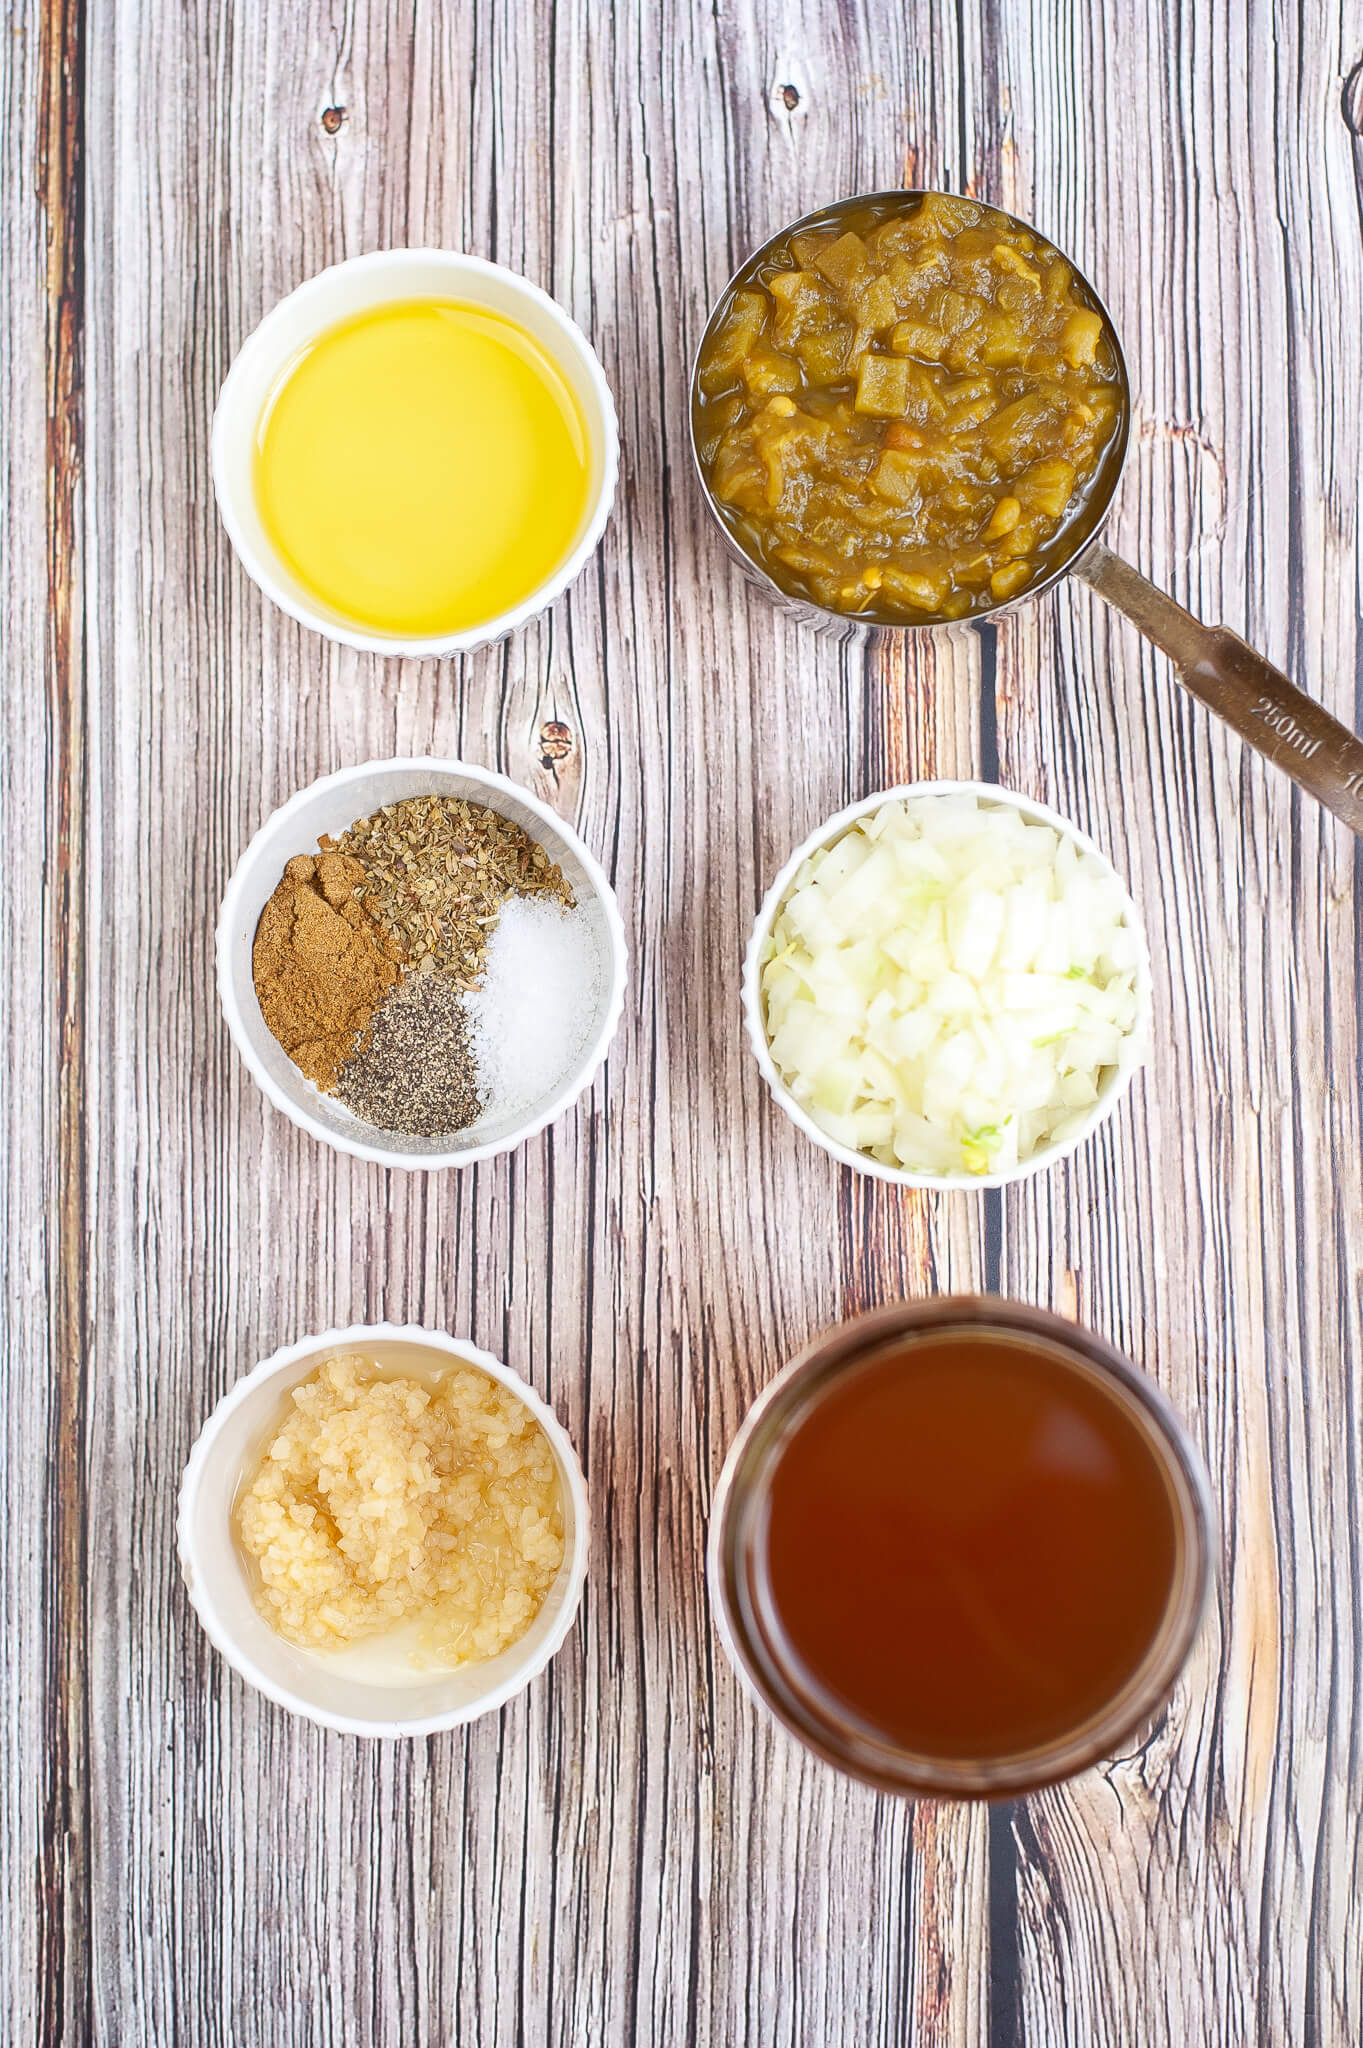 Ingredients for cooking displayed on a wooden surface including bowls of oil, diced pickles, spices, chopped onions, and a jar of green chili enchilada sauce.